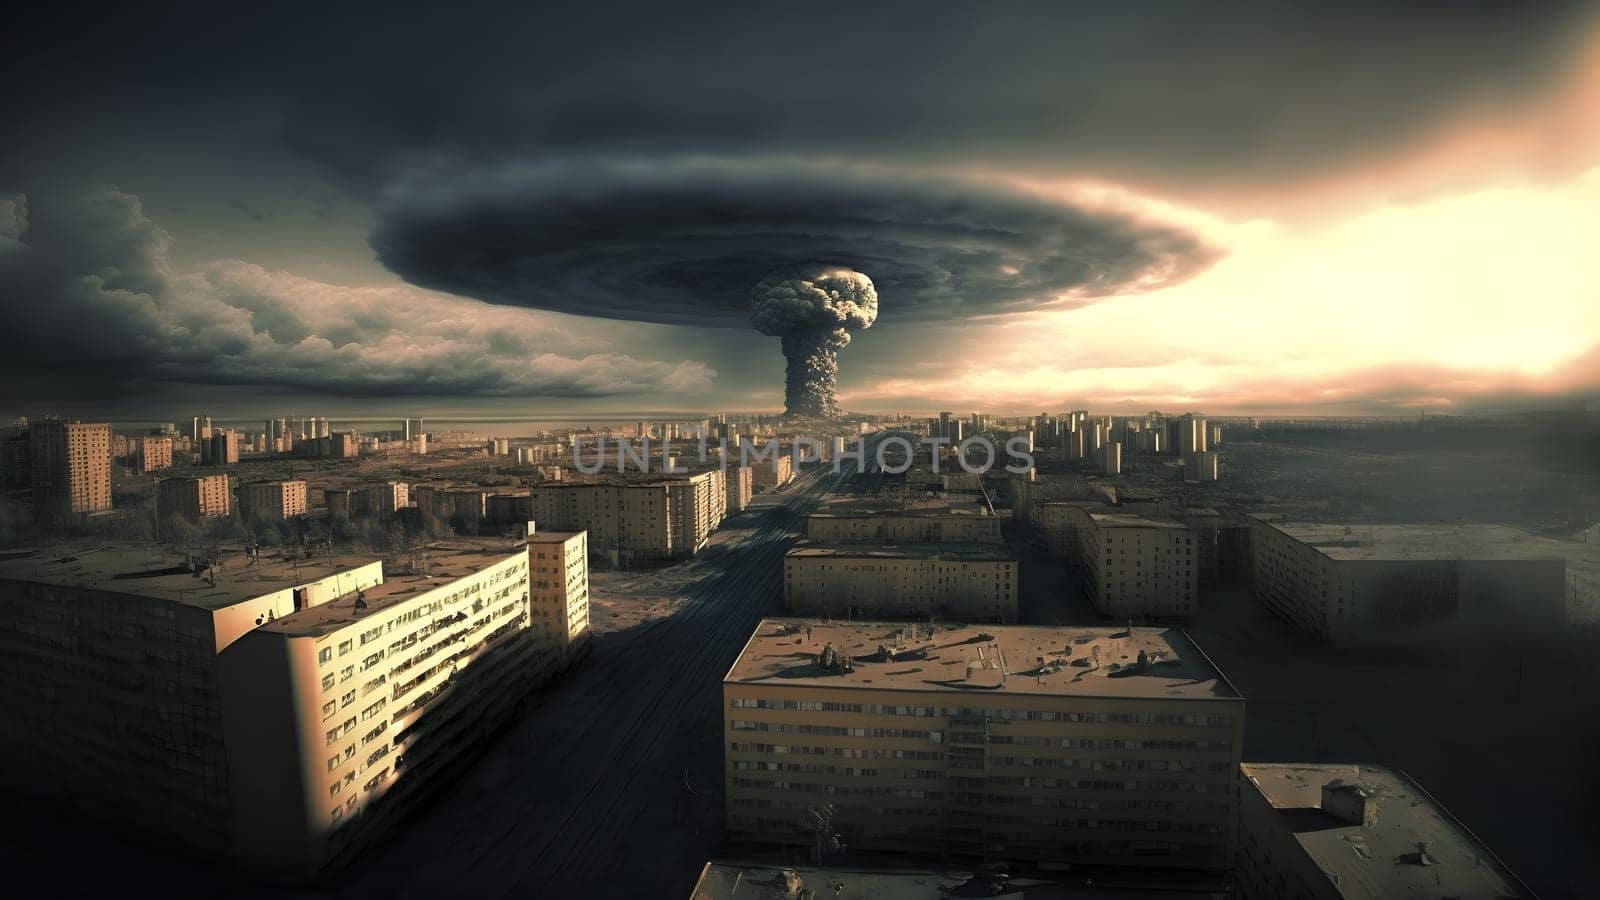 nuclear explosion mushroom cloud over russian city at morning, neural network generated art by z1b